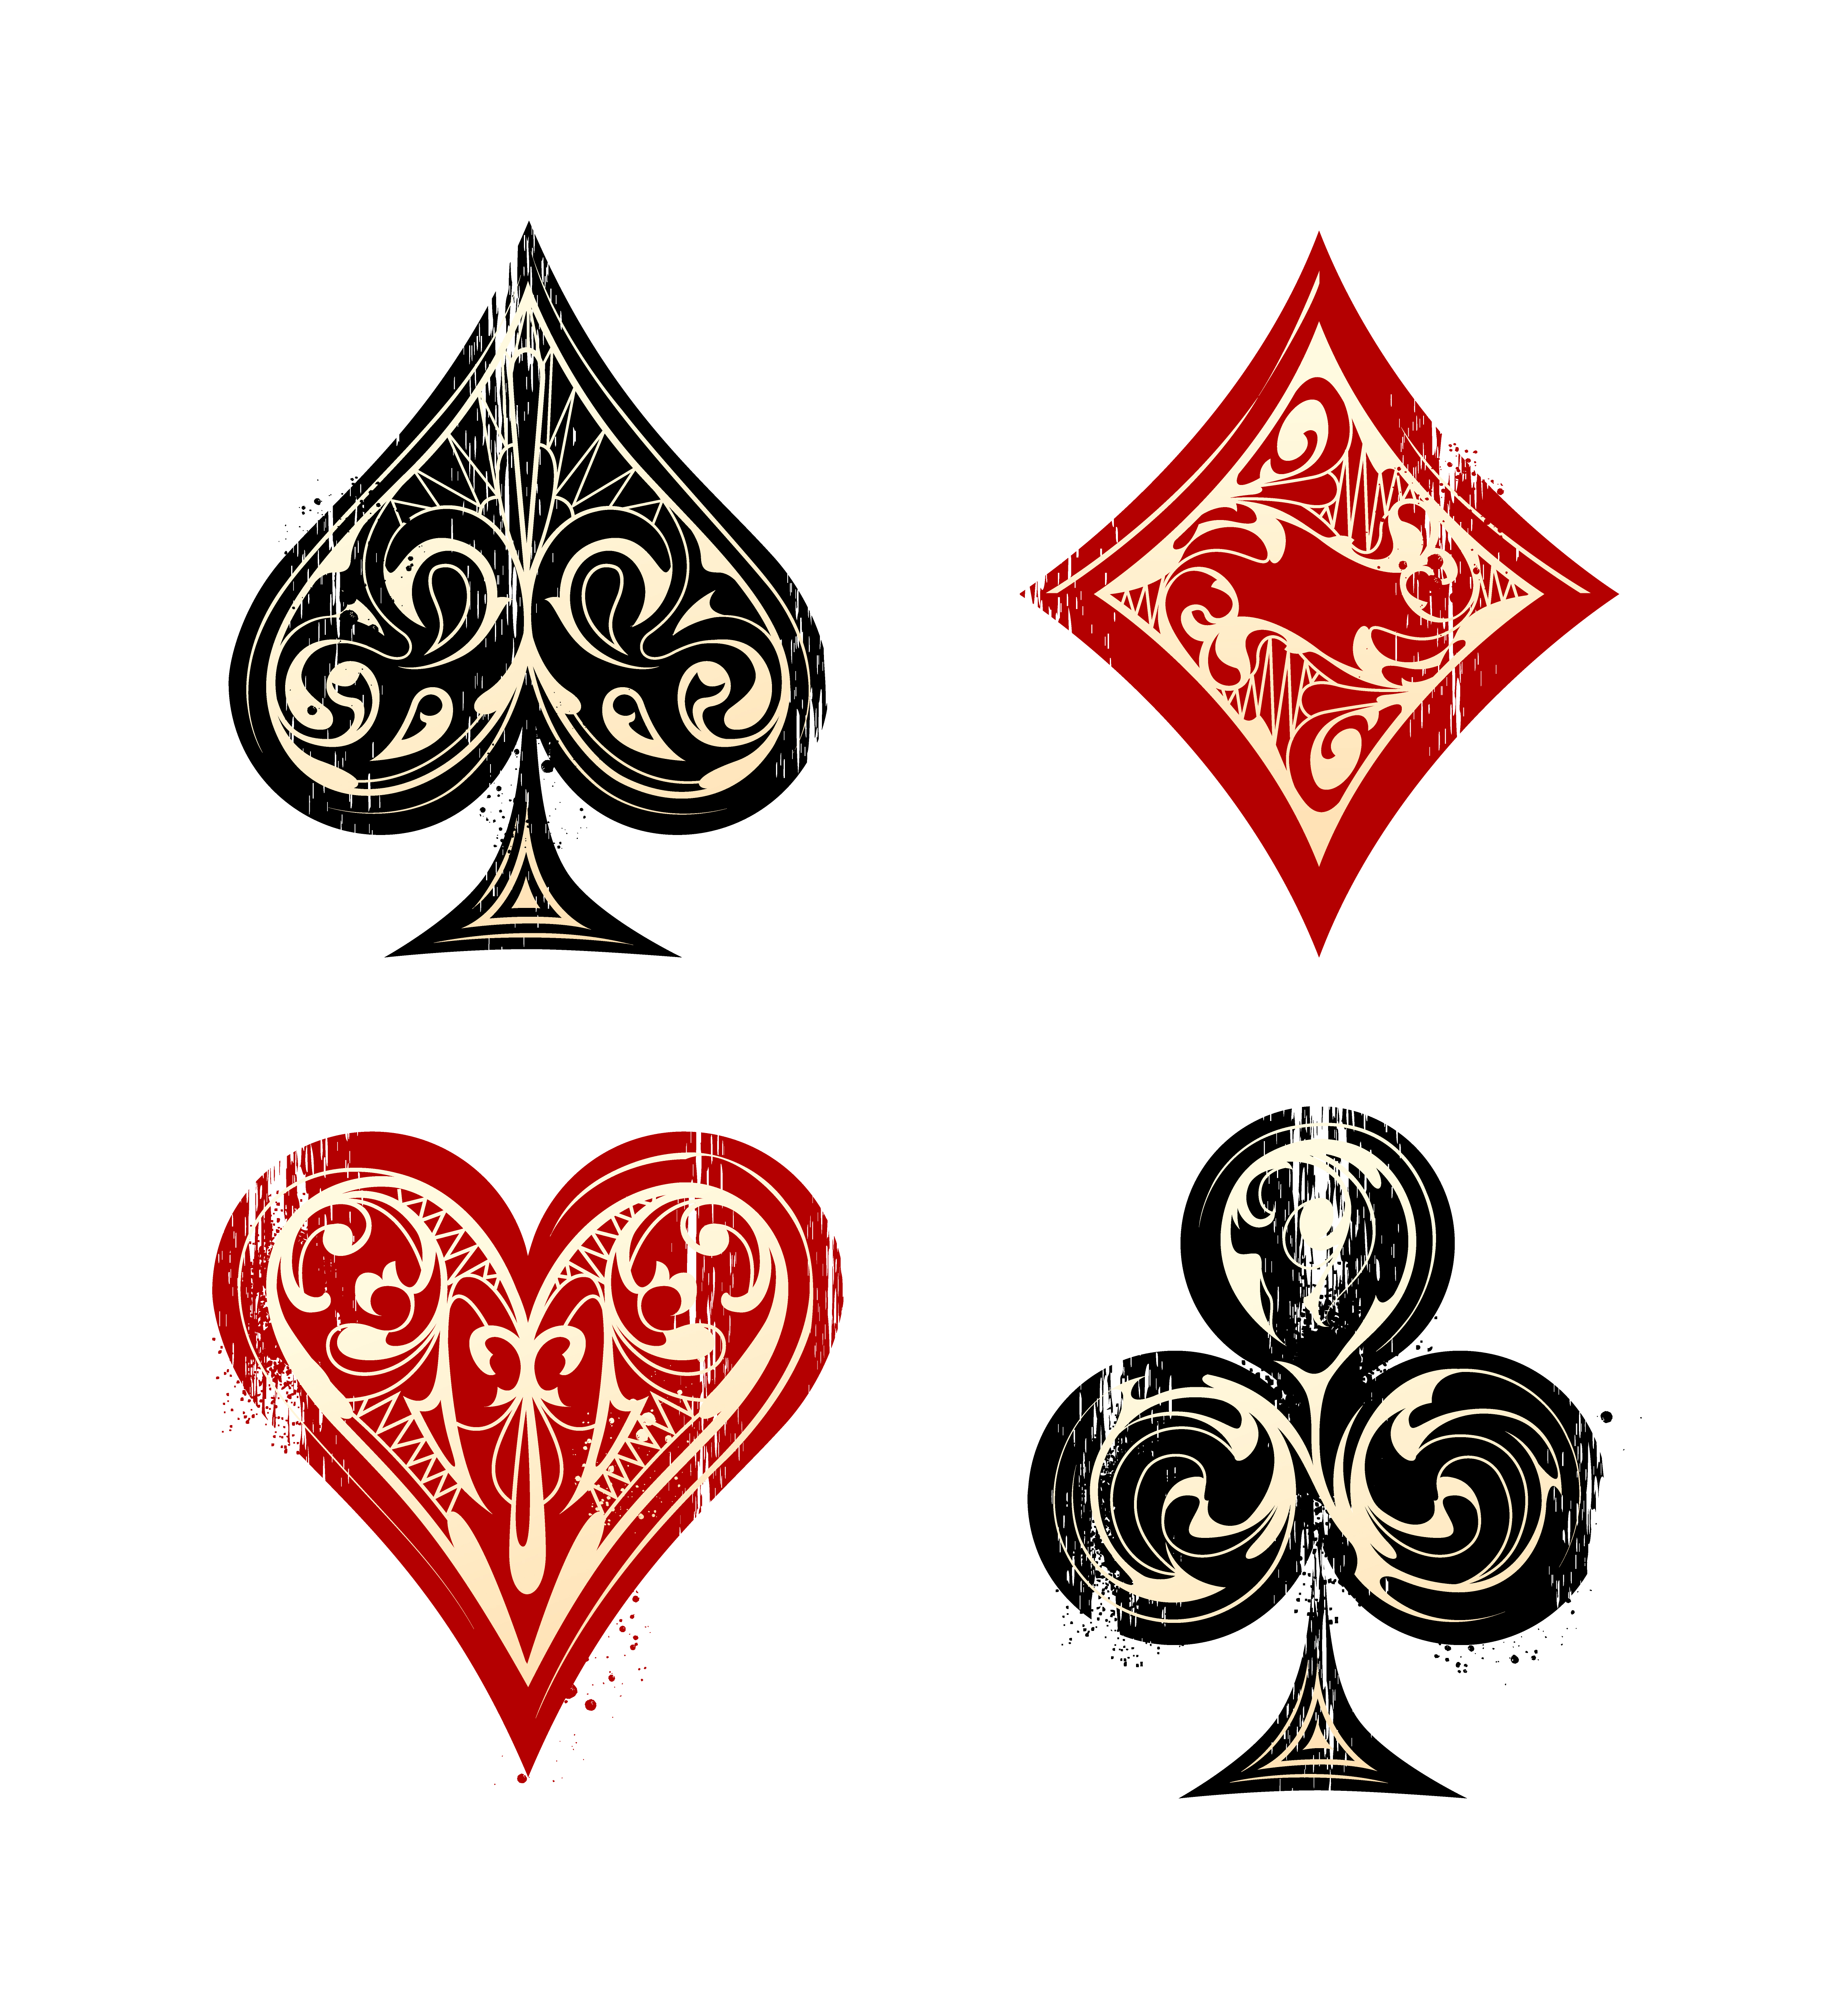 Vintage Playing Cards Sybmols - Download Free Vectors ...